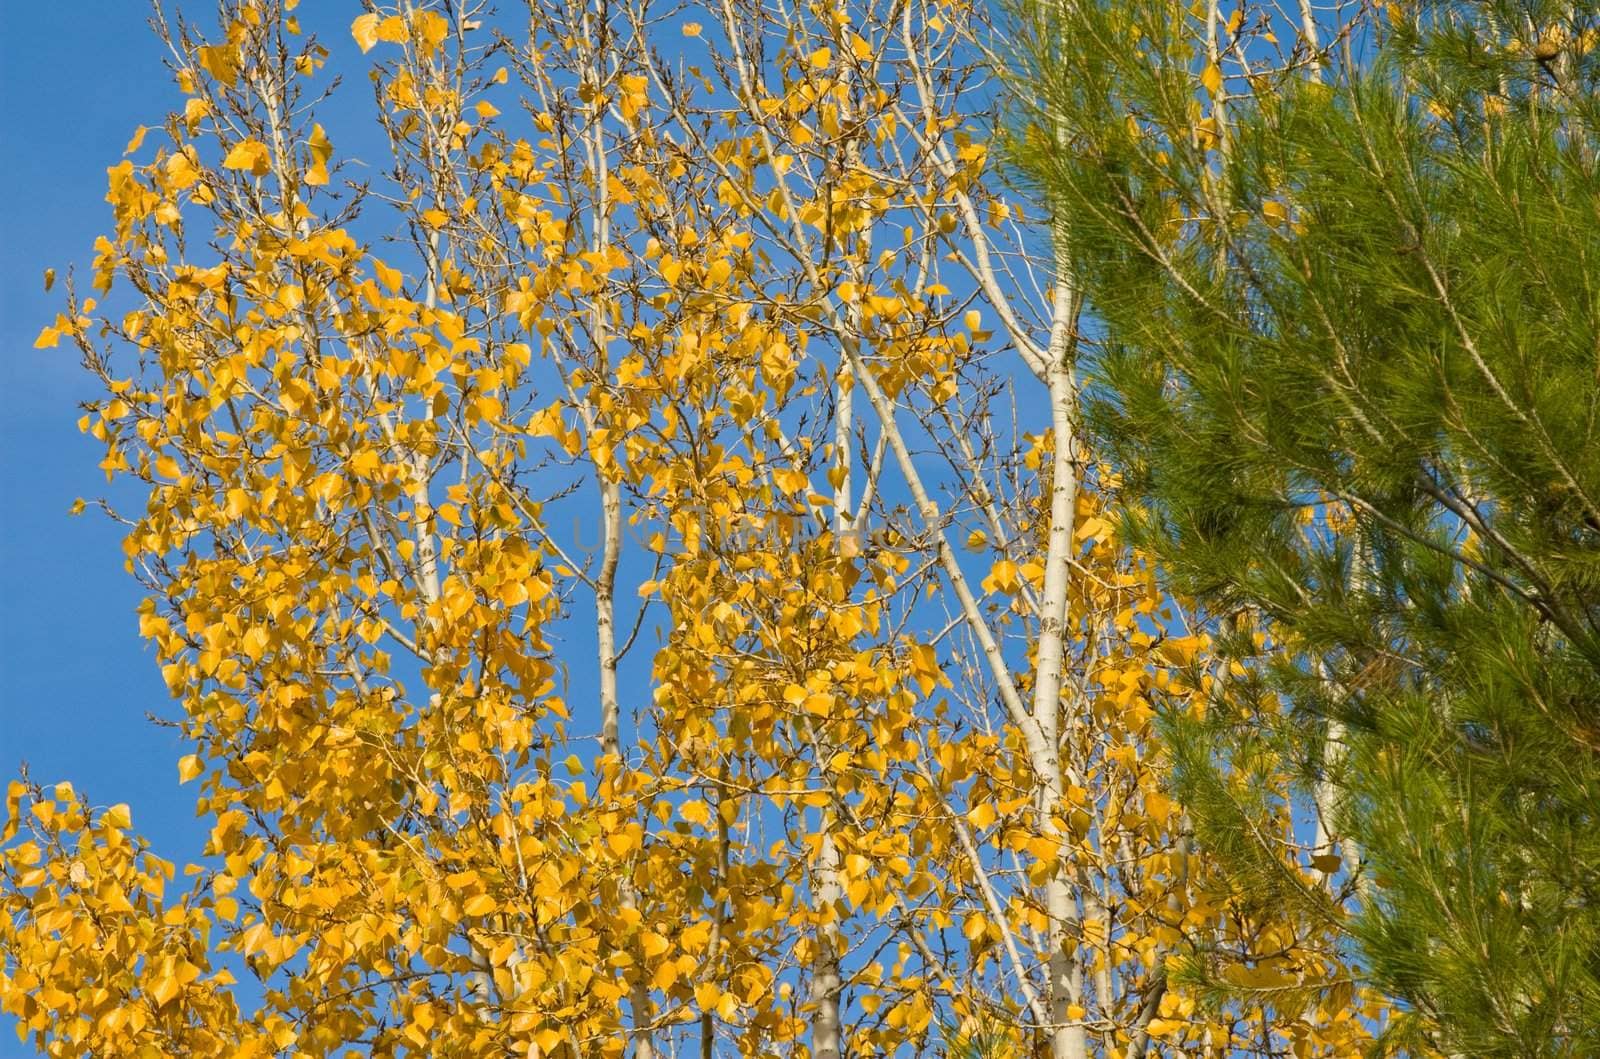 Close-up of tree branches with different autumn leaves as they change color